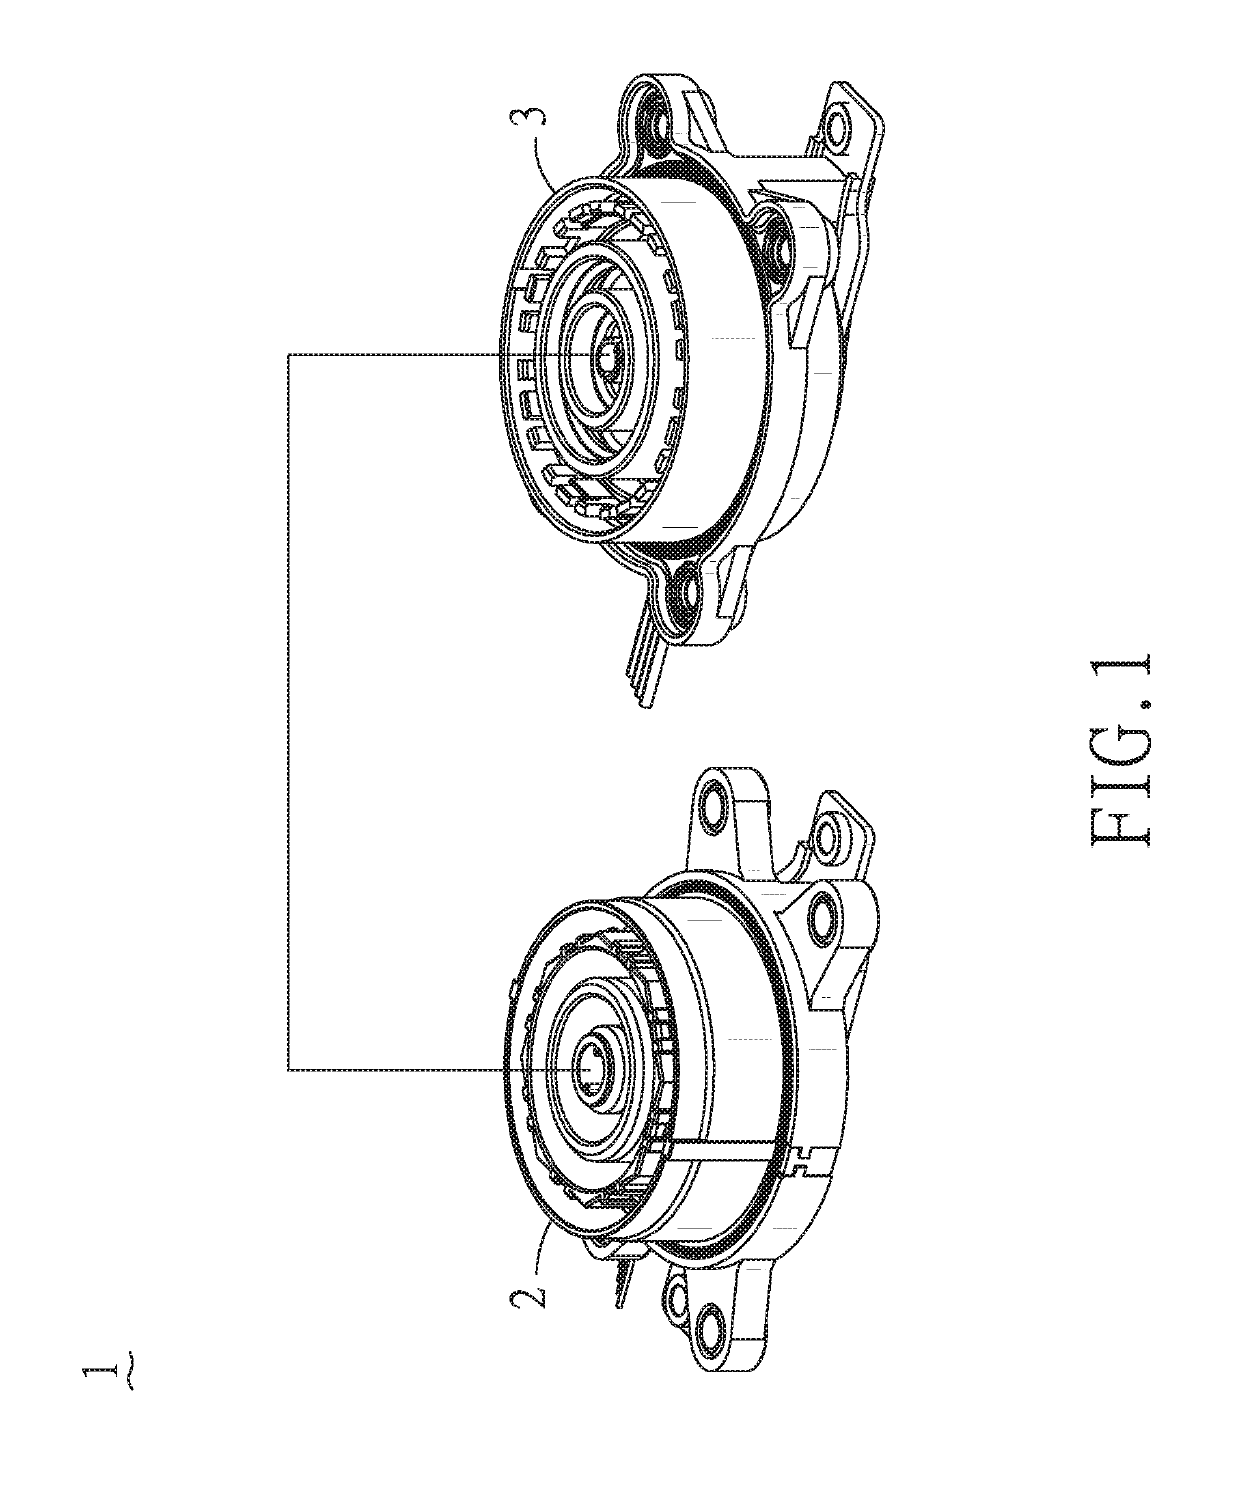 Electric vehicle charging connector assembly